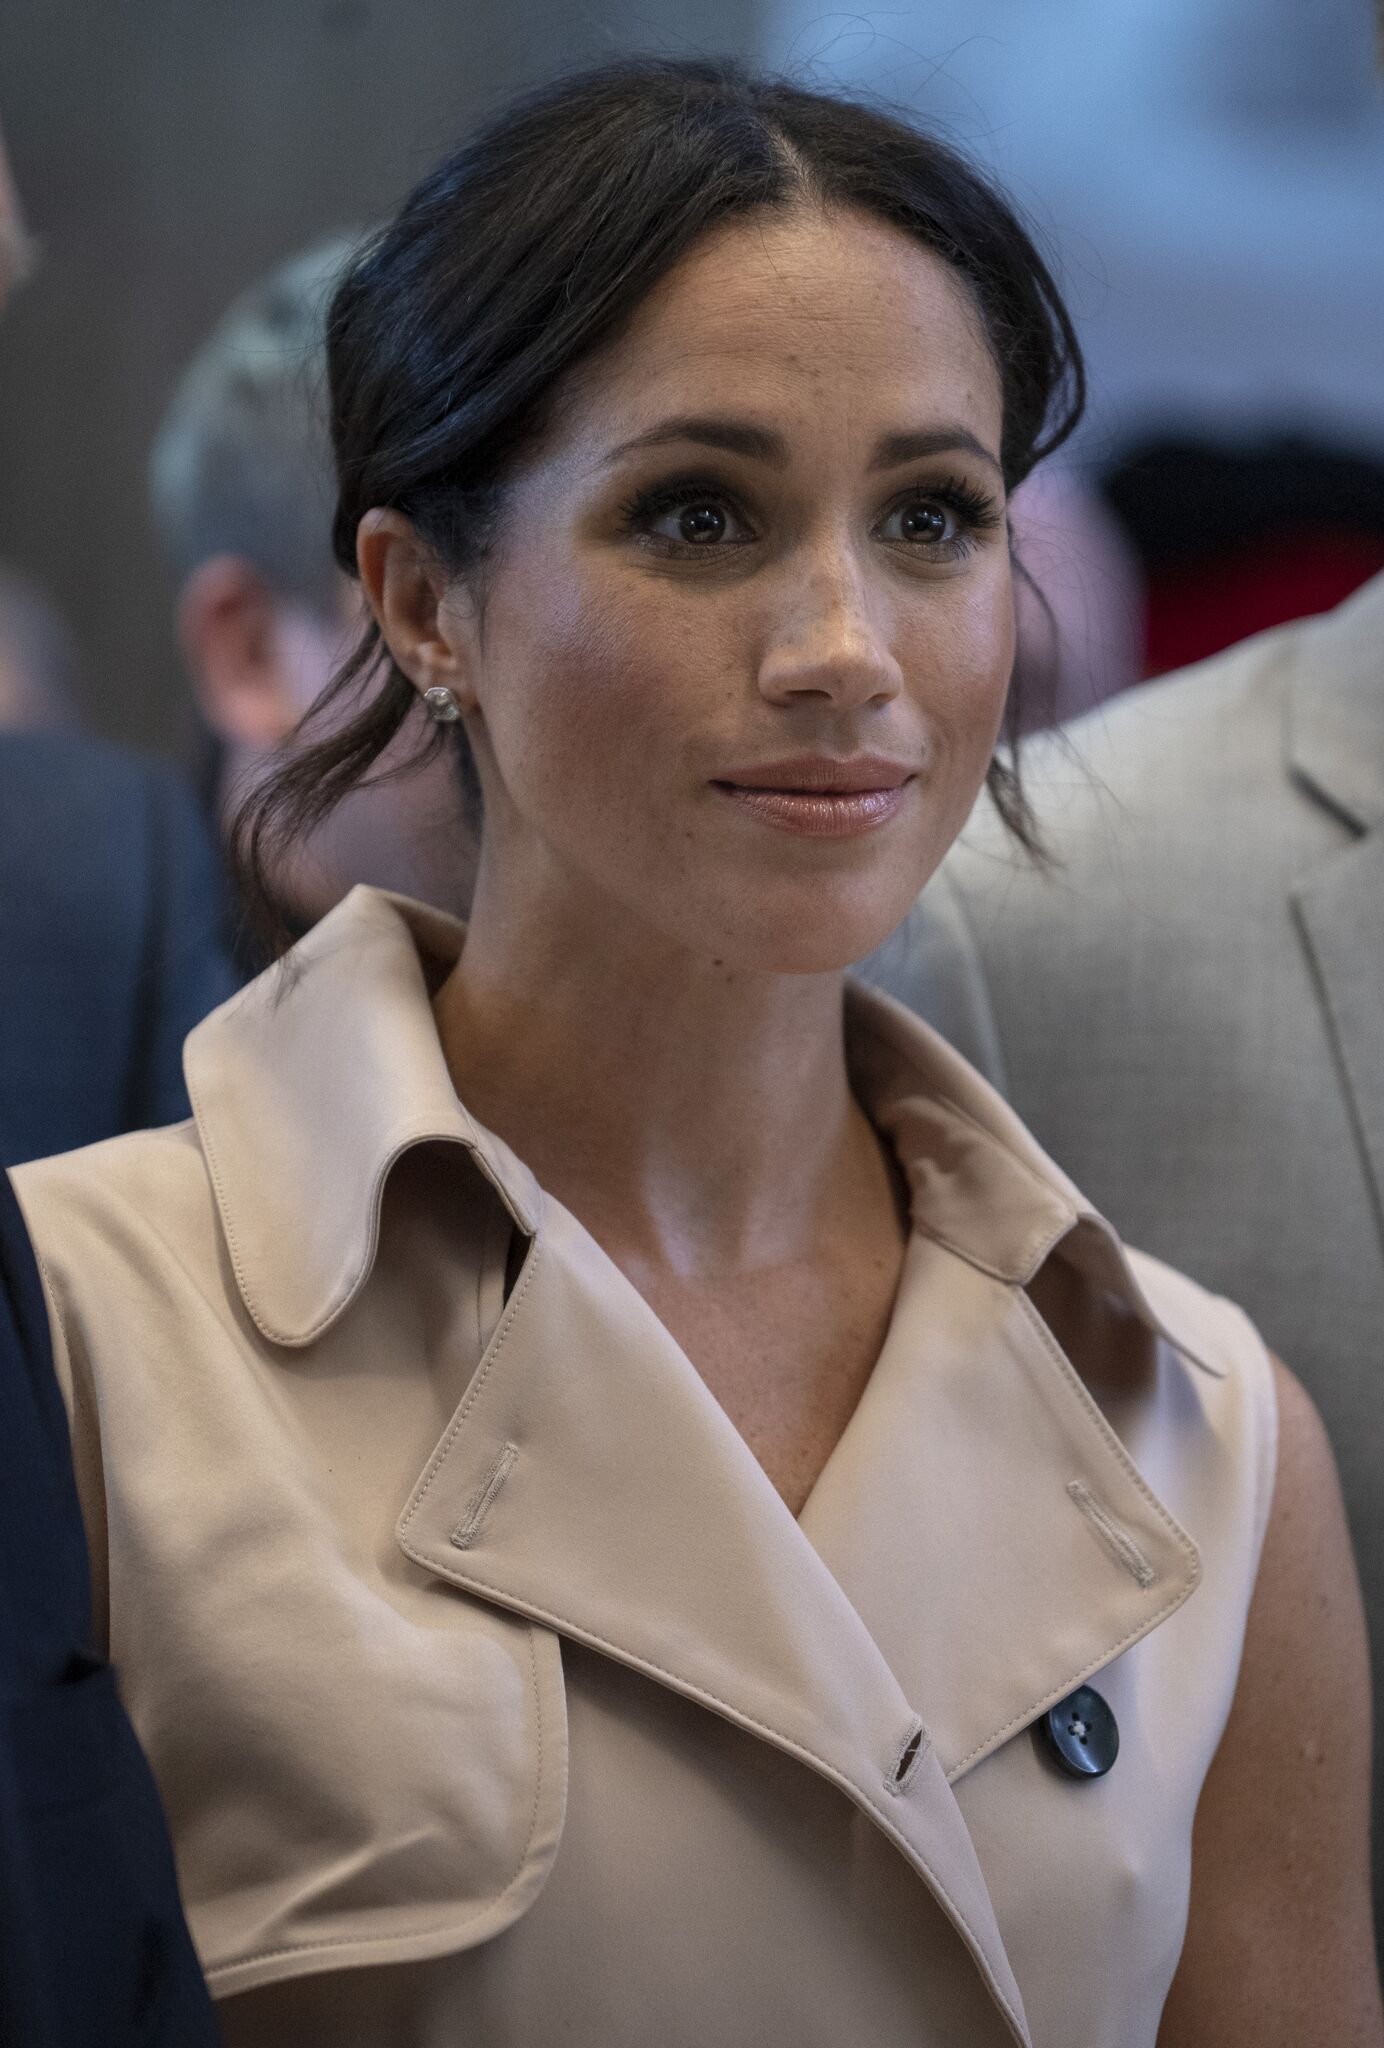 Meghan, Duchess of Sussex visits the Nelson Mandela Centenary Exhibition at Southbank Centre's Queen Elizabeth Hall on July 17, 2018 | Photo: Getty Images